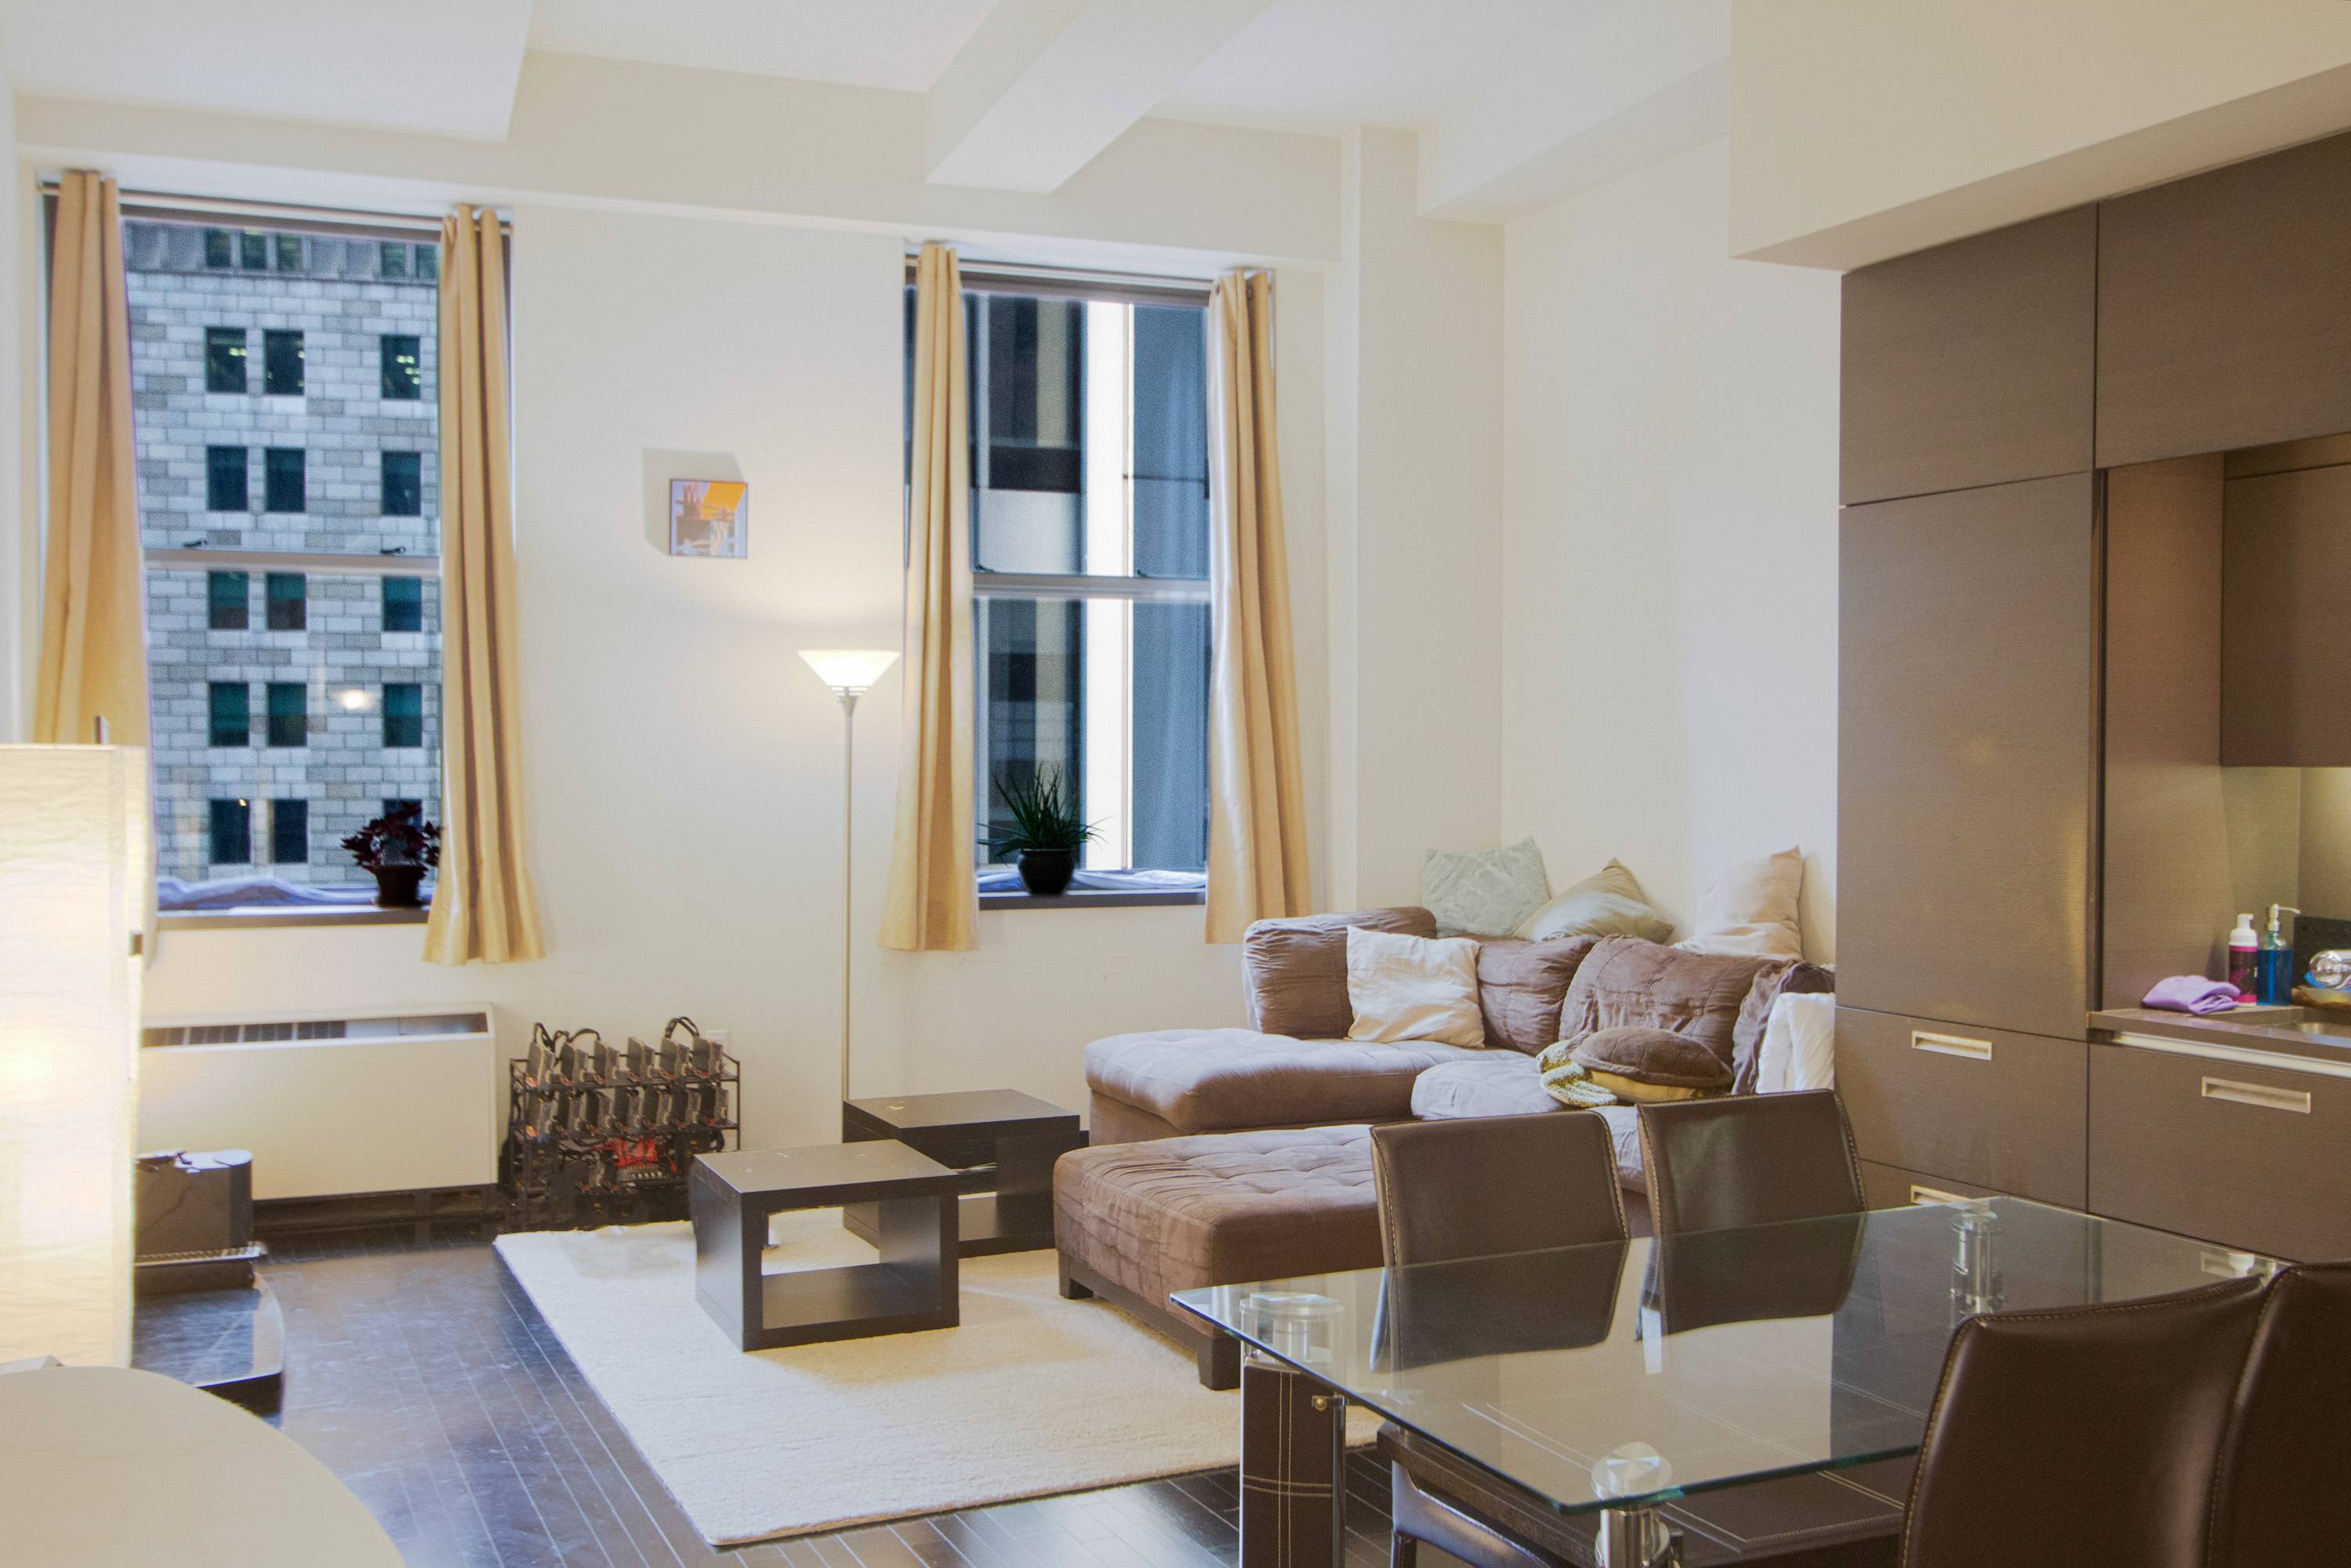 Wall Street: 2 Bed/2 Bath Luxury Condo in Historic Financial District